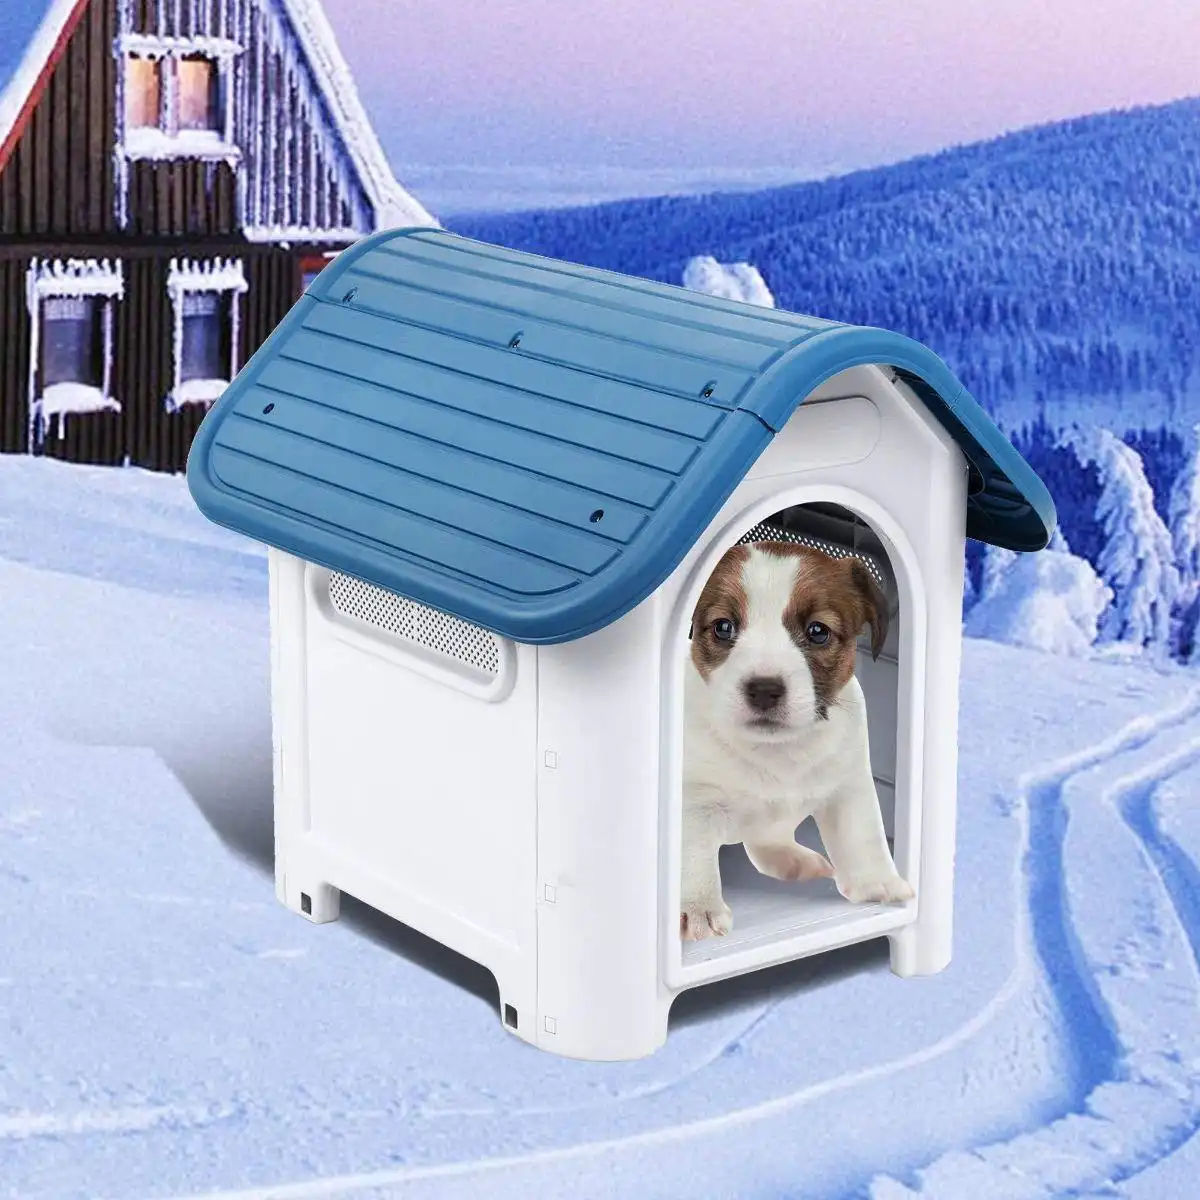 Waterproof Plastic Dog House Puppy Kennel Indoor Outdoor Pet Shelter - Up to 20lb